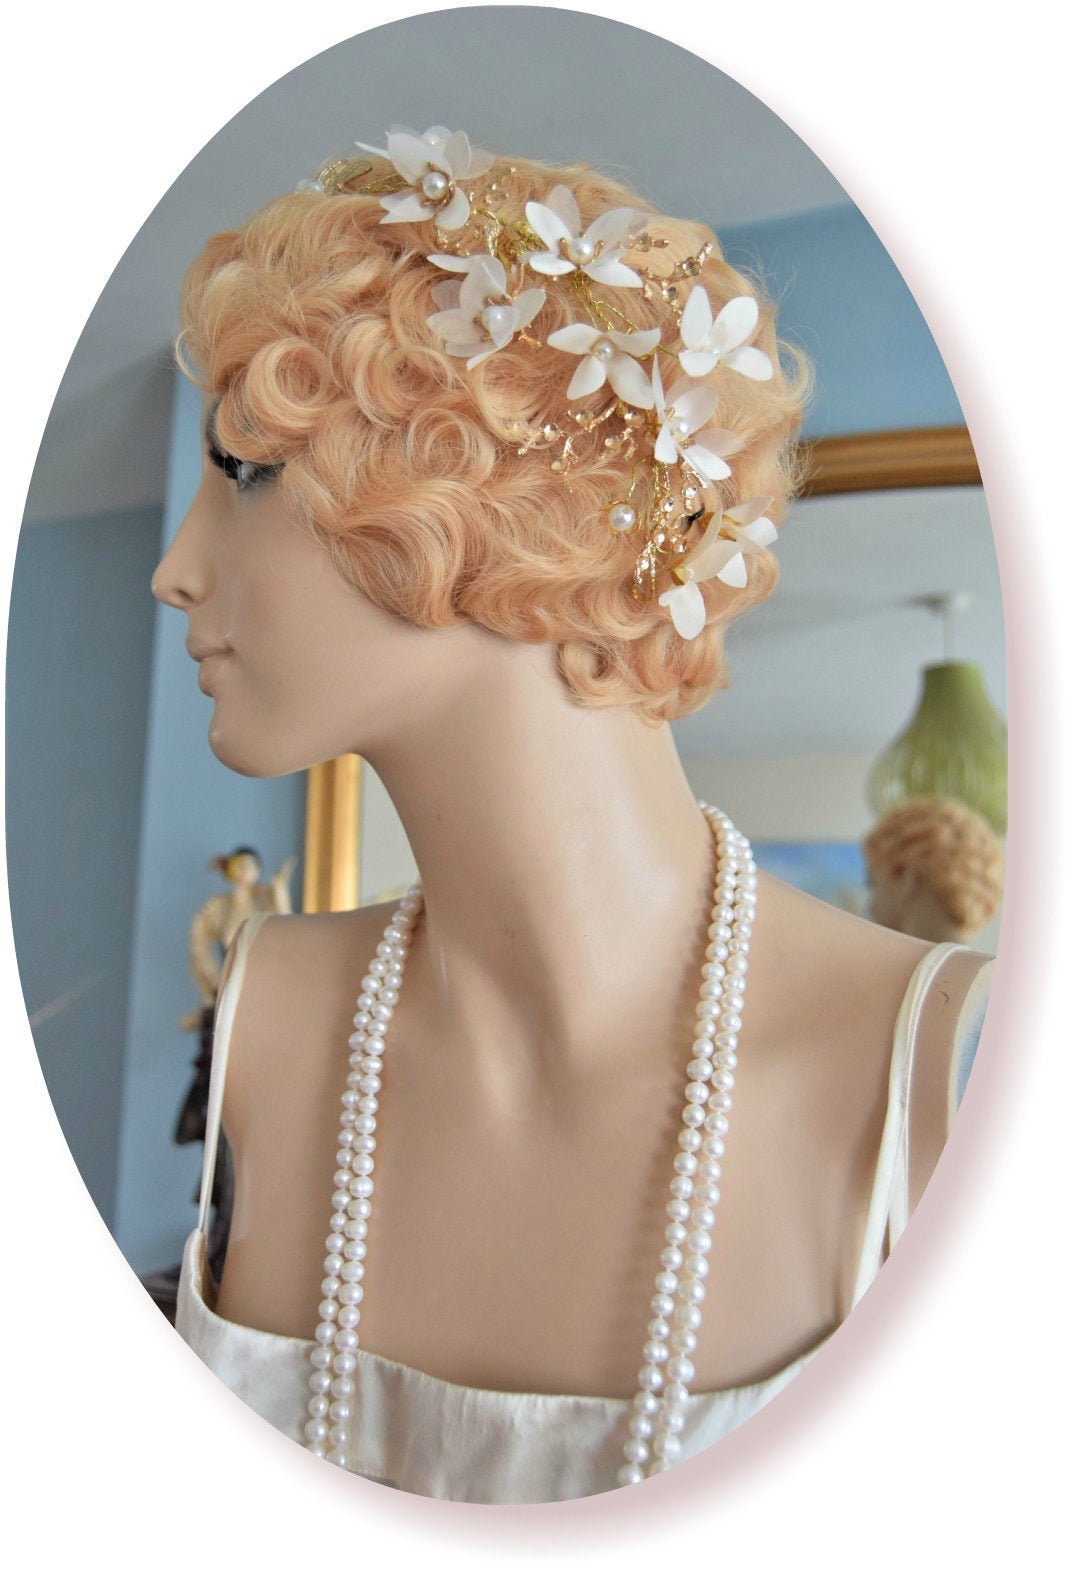 Beautiful 1920s 1930s romantic headband ethereal bridal white with gold magnolia floral pin hand made headpiece